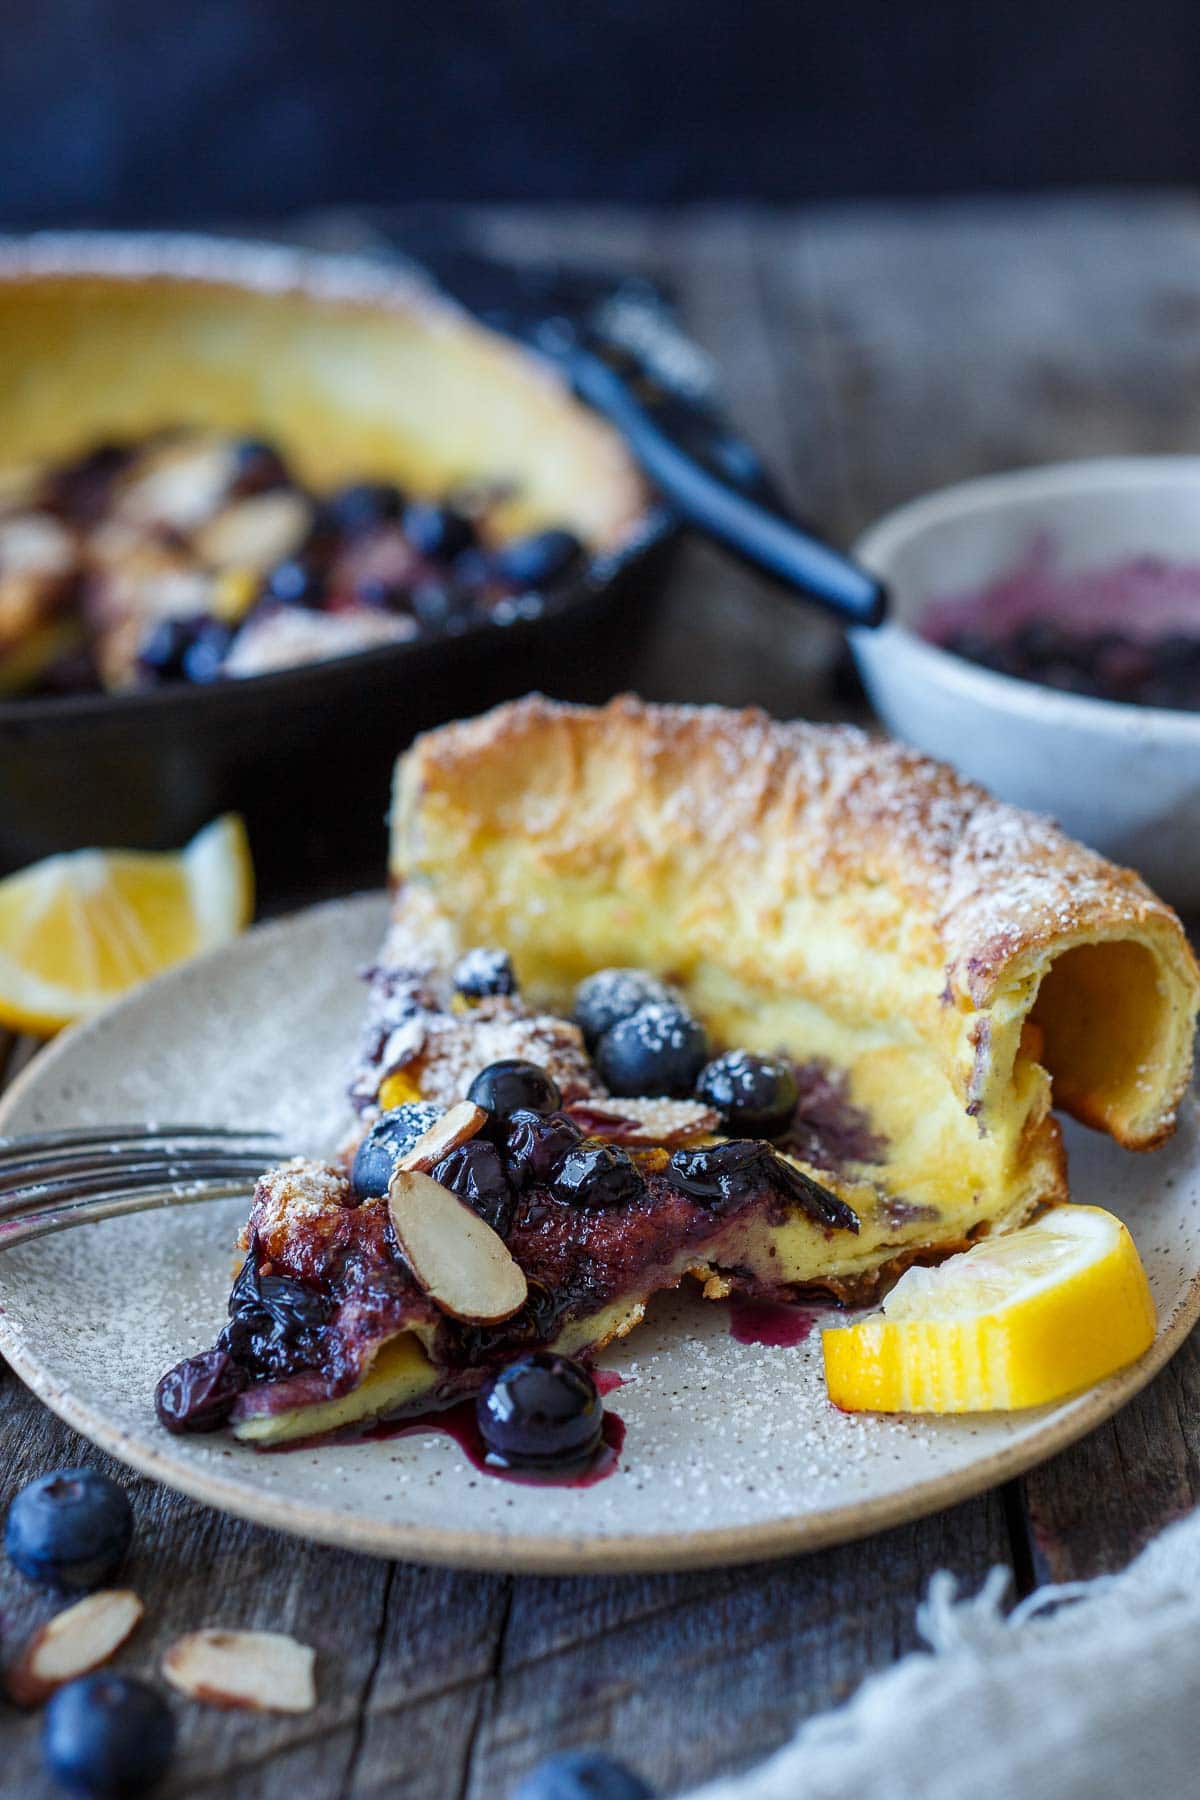 Delicious and impressive Blueberry Dutch Baby is made with everyday pantry ingredients and requires only about 10 minutes of hands-on time! Top with maple-sweetened blueberry sauce for a perfect brunch or dessert.